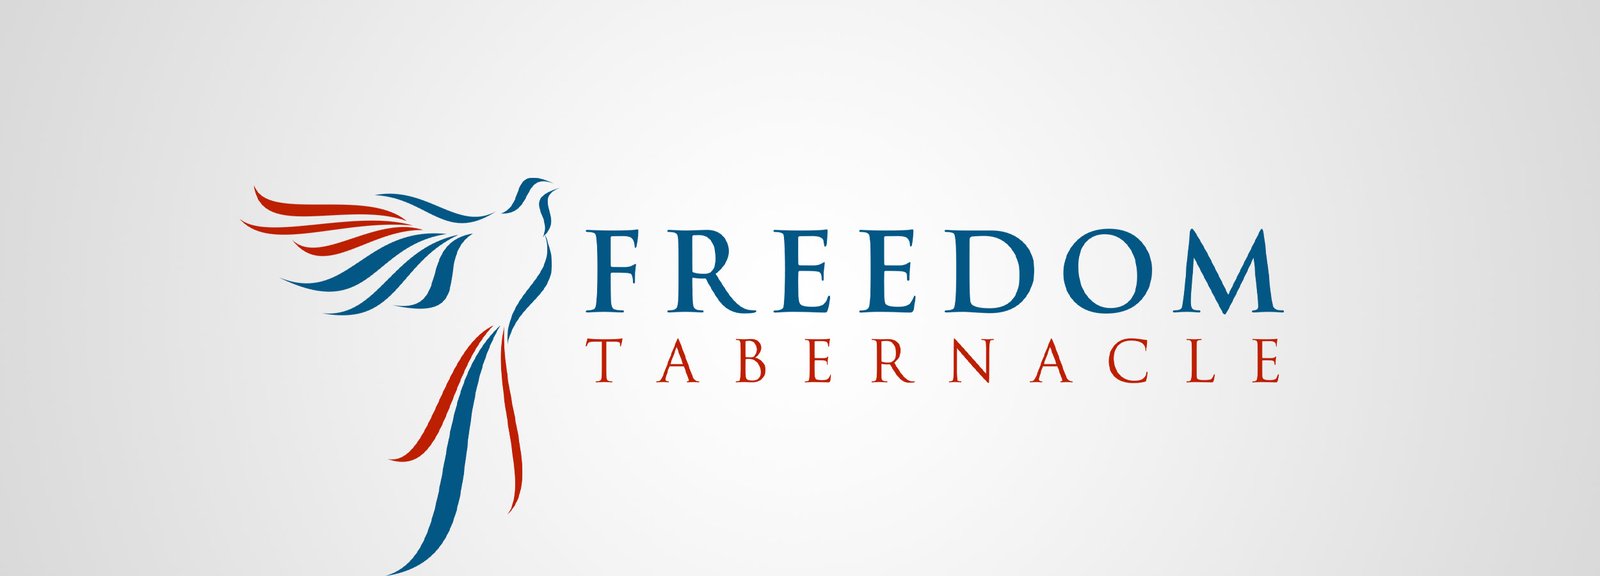 Freedom Tabernacle Banner